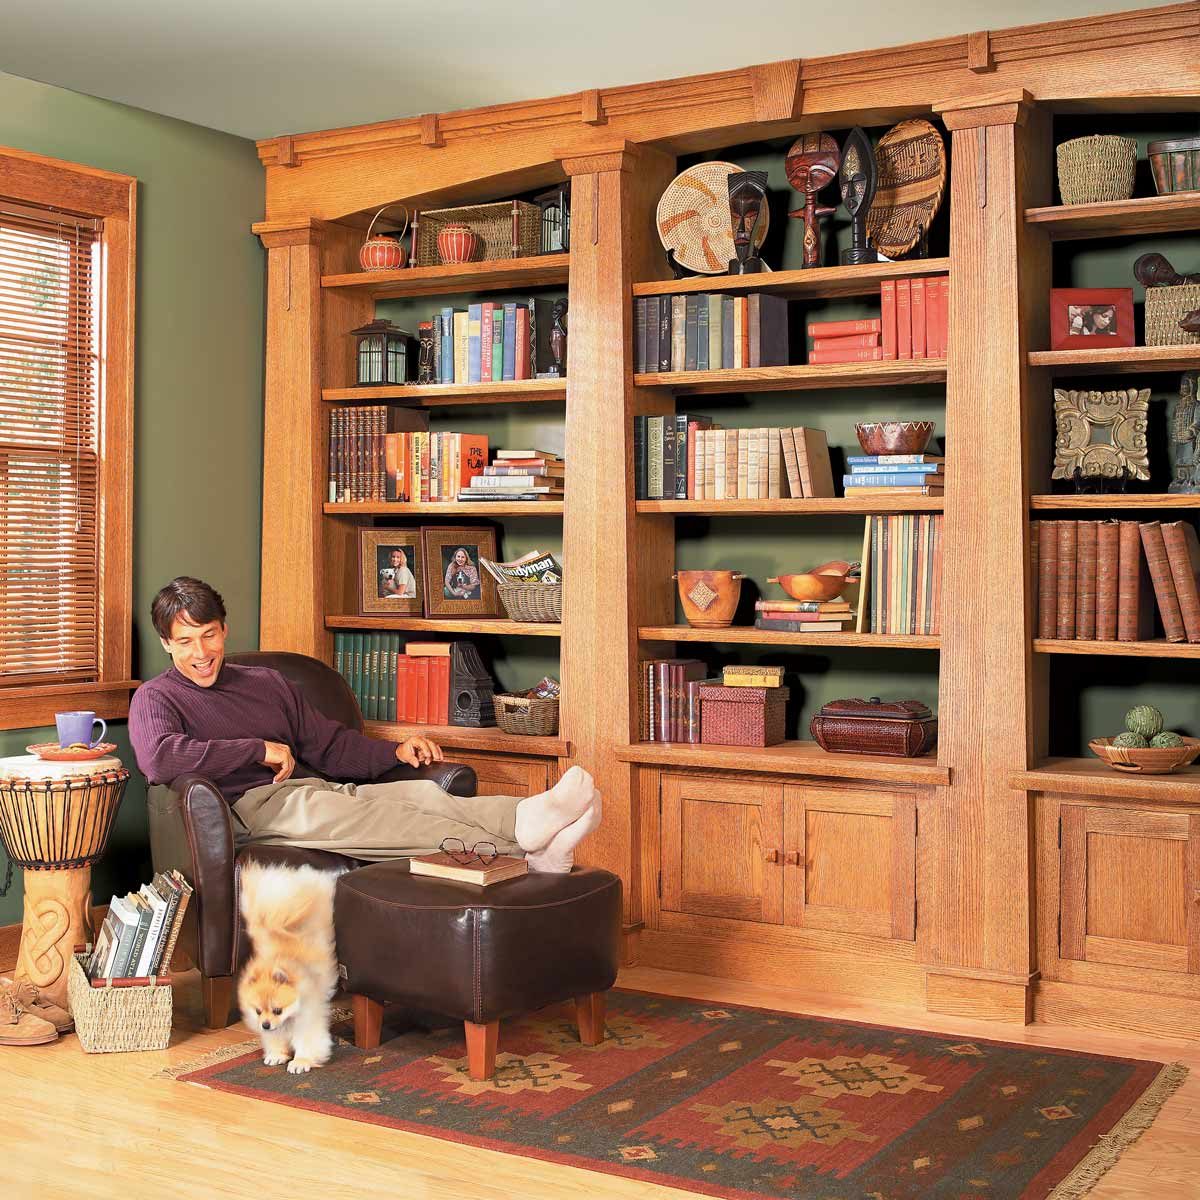 18 Built-In Bookshelf Ideas To Display Storage In Style